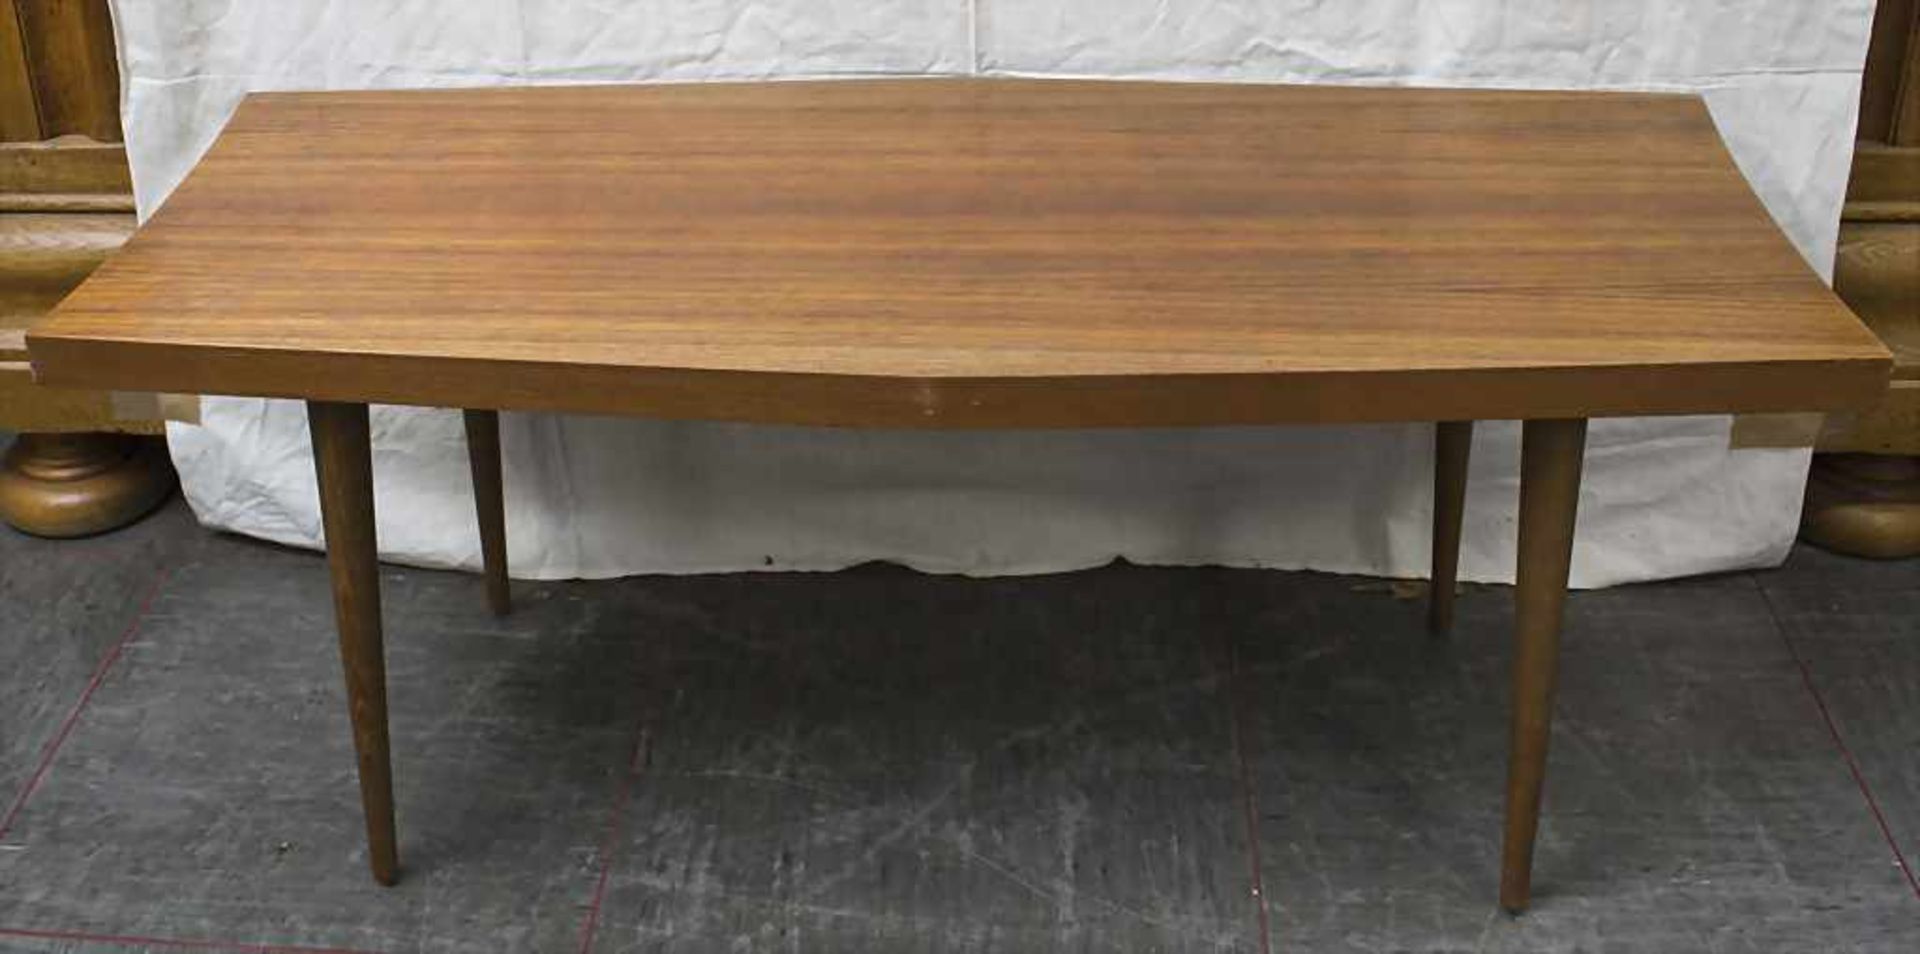 Couchtisch / A coffee table, 1960er JahreMaterial: Holz, Maße: H. 50 cm, L. 119 cm, T. 50 cm, - Image 2 of 2